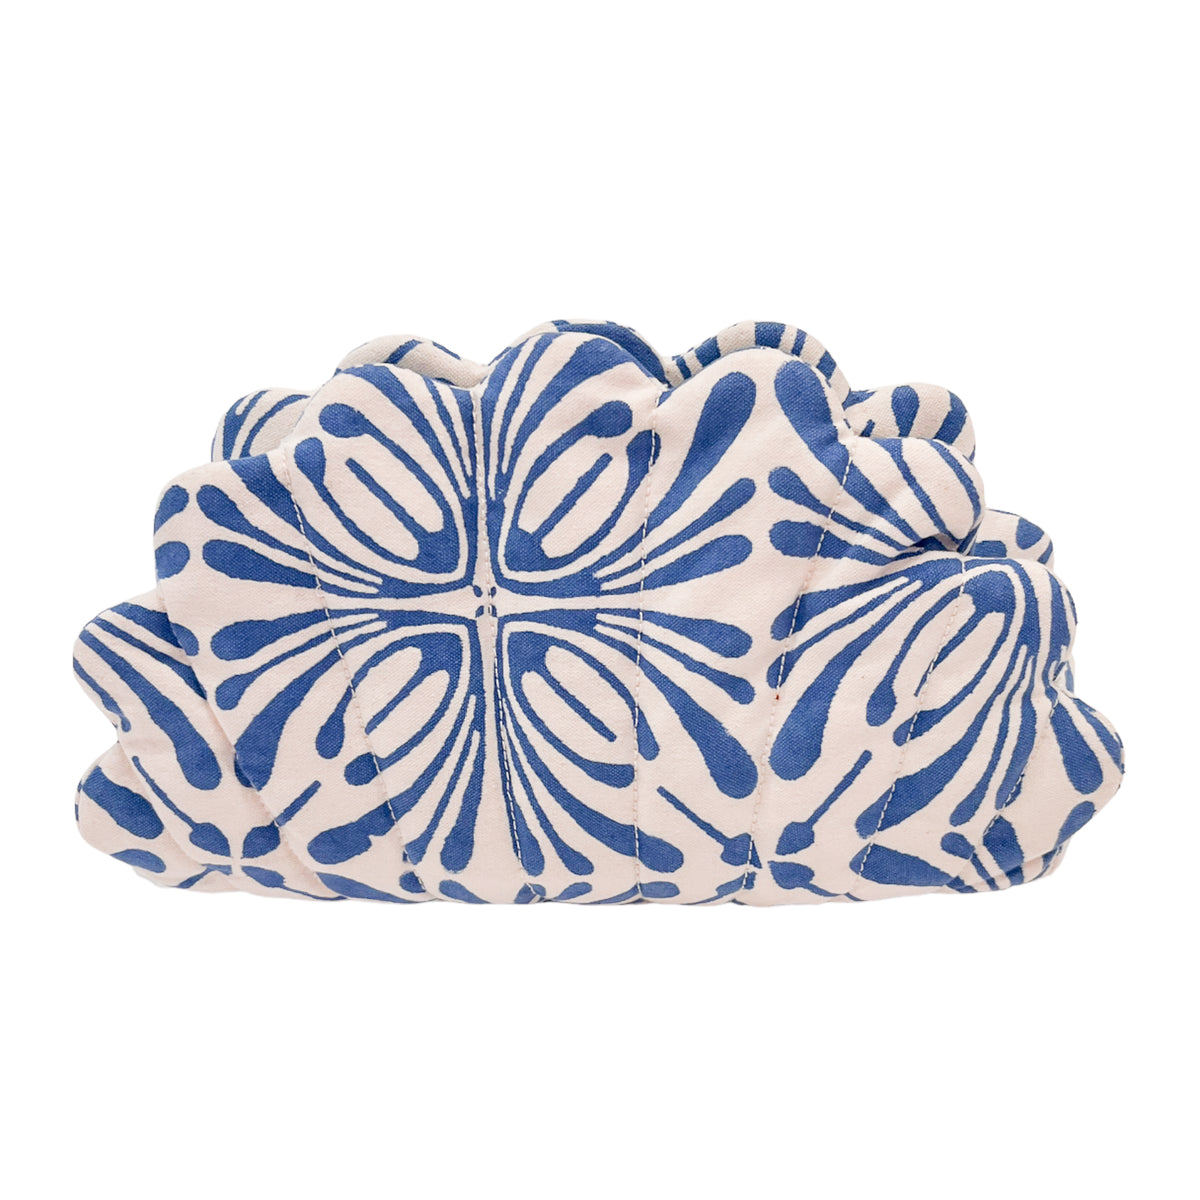 Quilted Clamshell Clutch - Blue Psychedelic